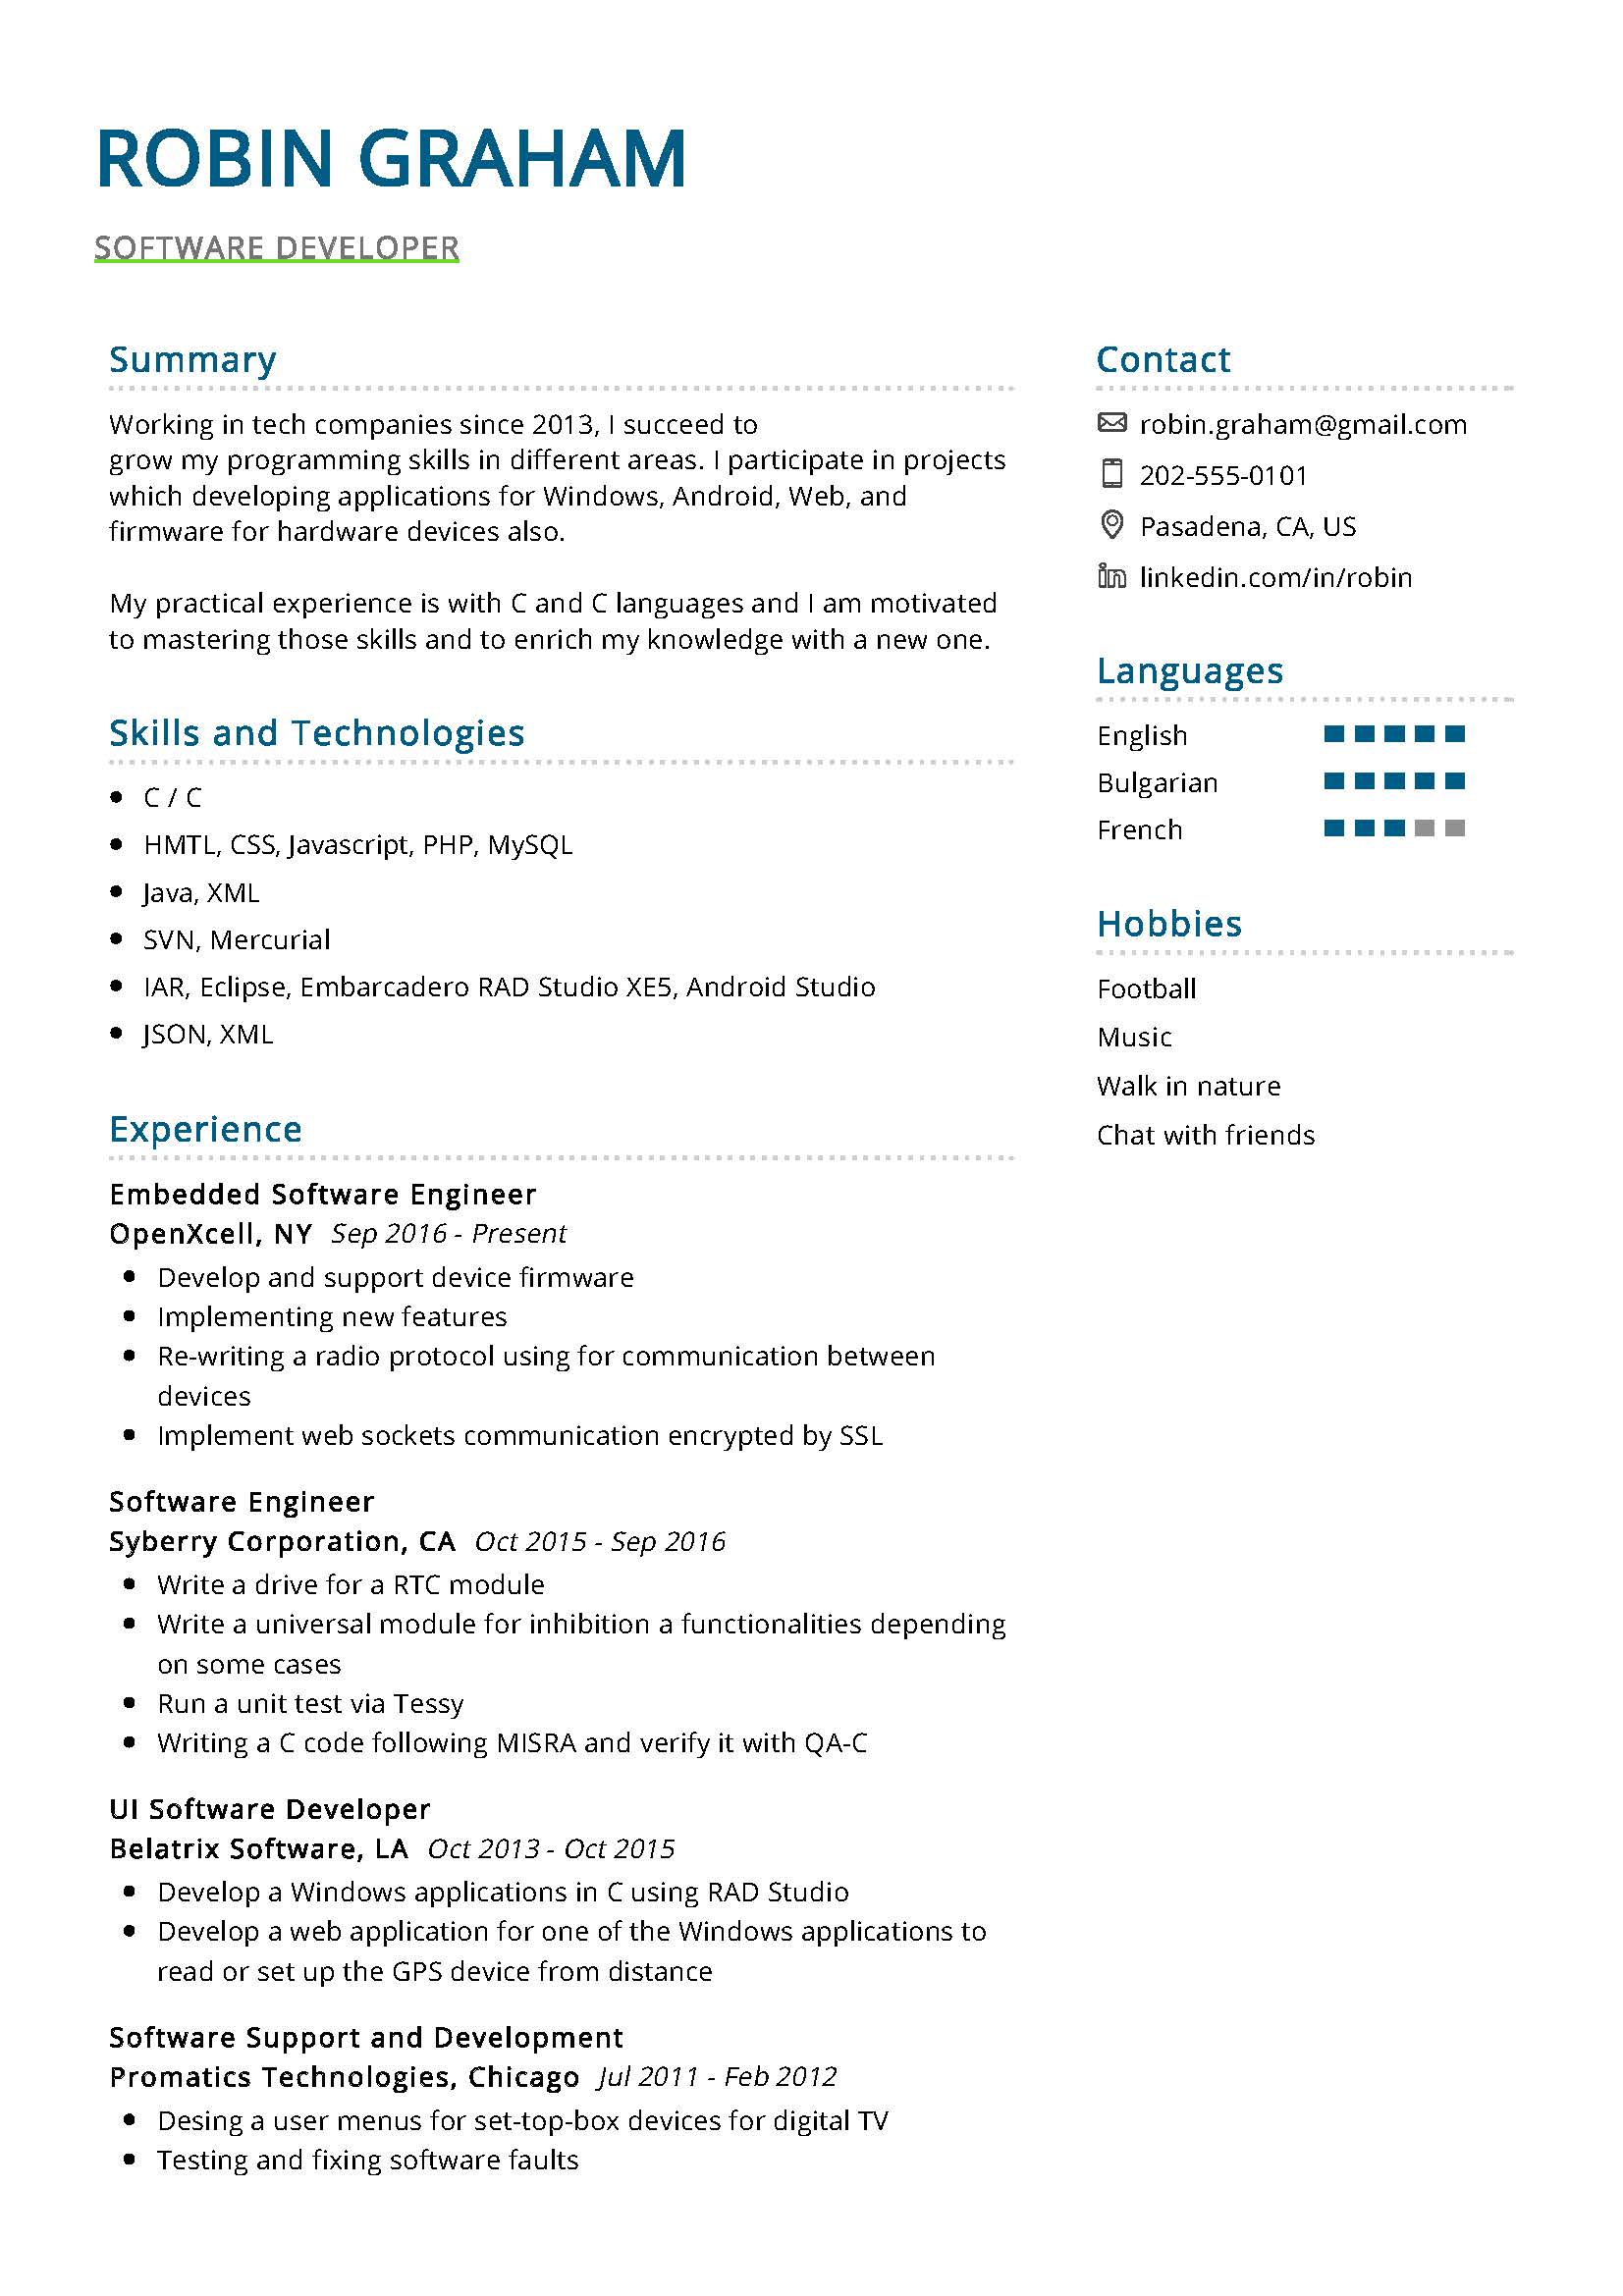 Resume Format For Experienced Software Engineer from resumekraft.com